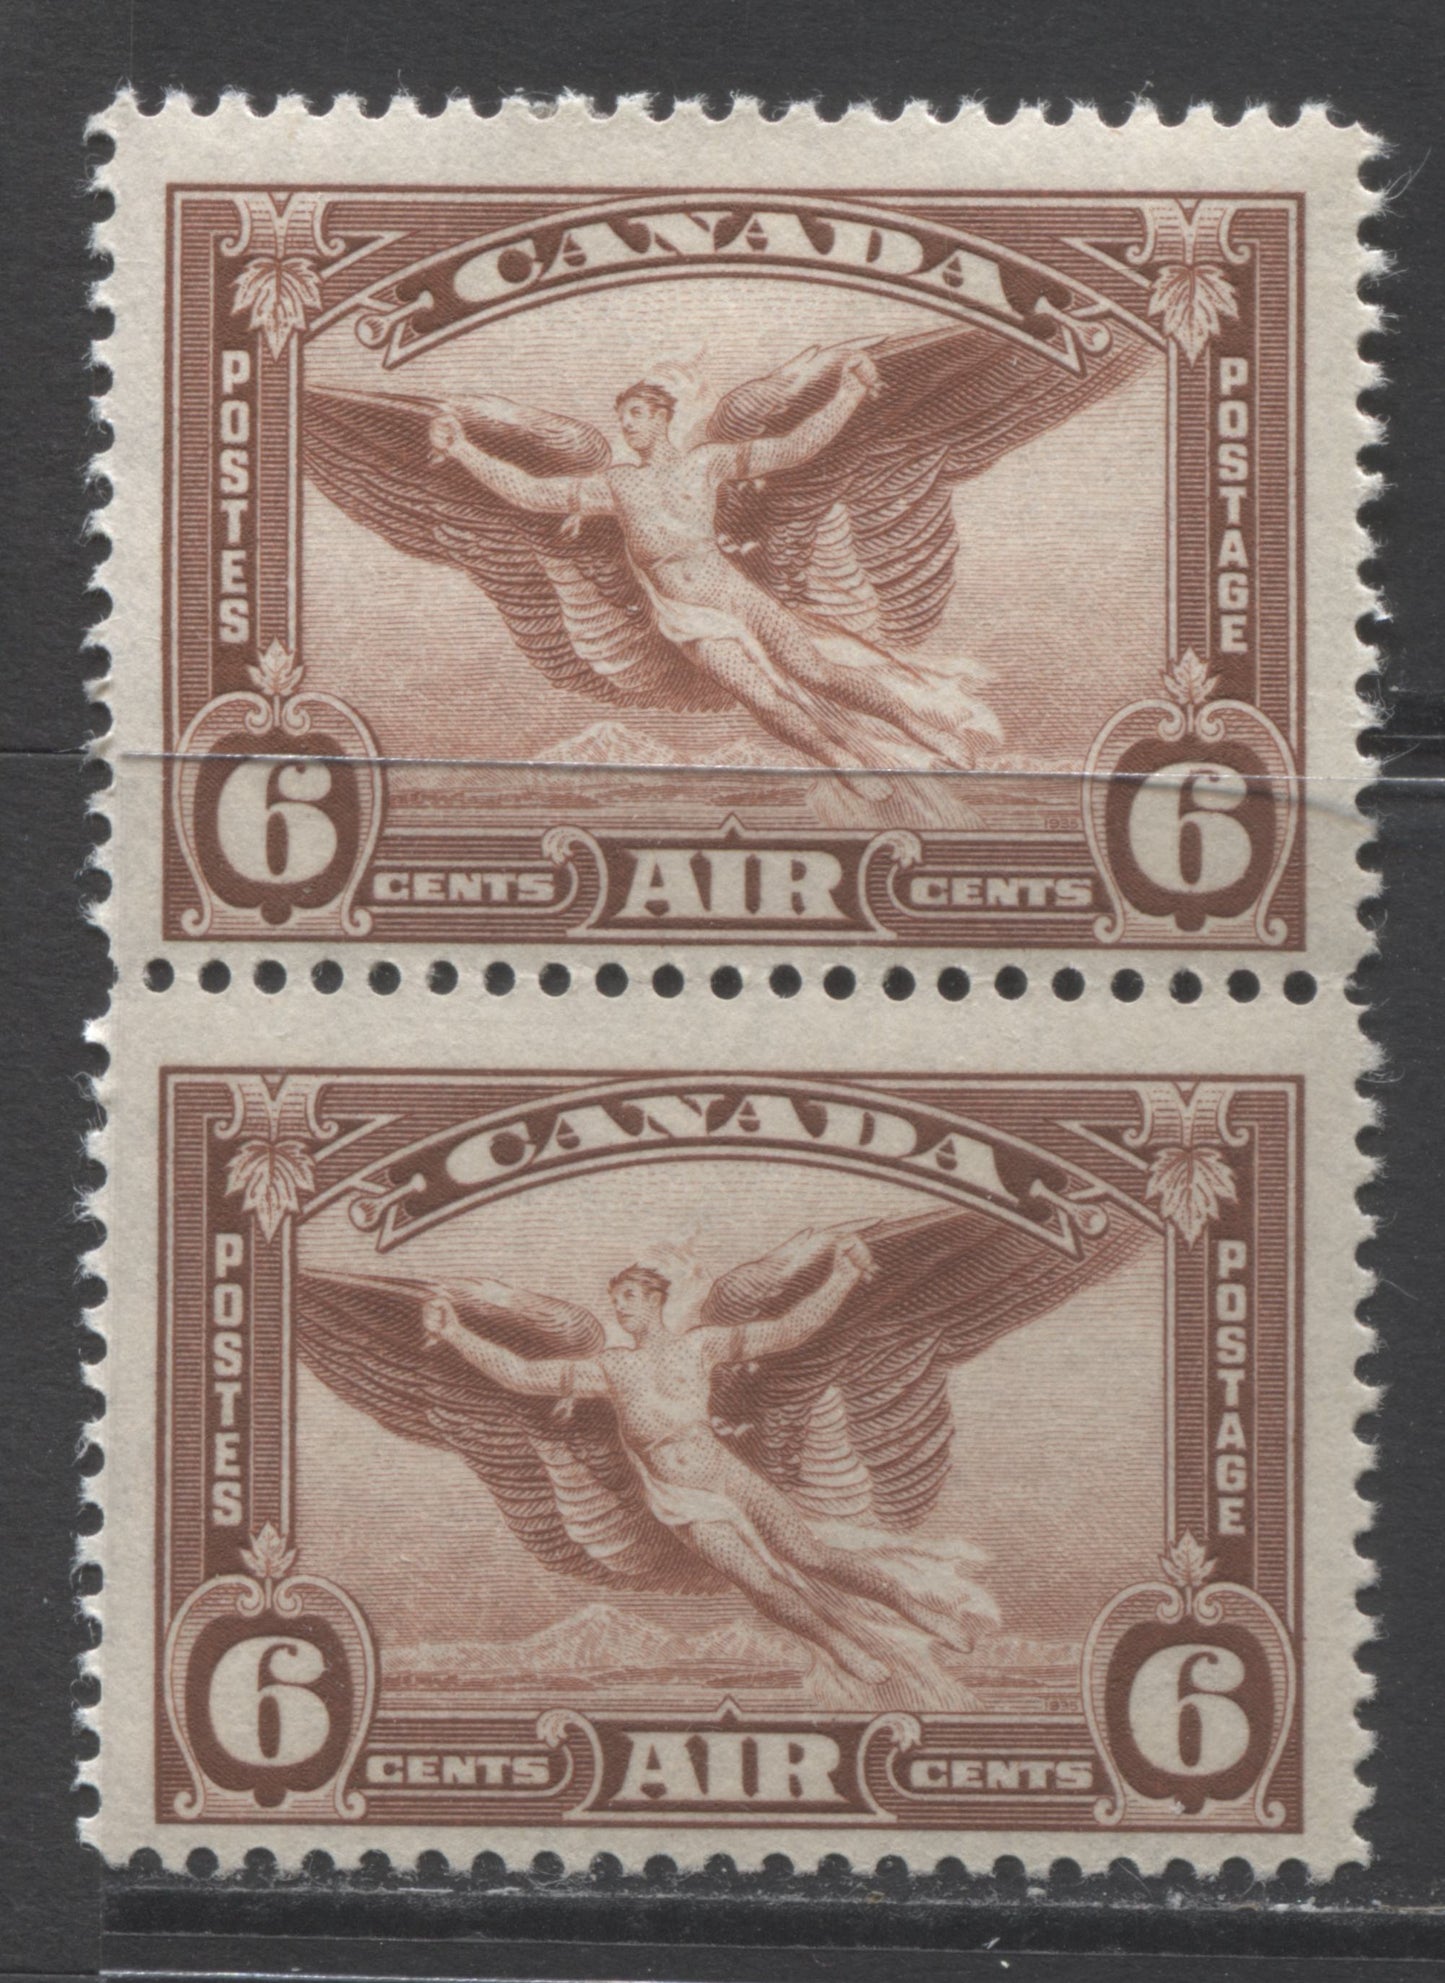 Lot 153 Canada #C5ii 6c Red Brown Daedalus In Flight, 1935 Airmail Issue, A FOG/NH Pair With Moulting Wing, Pl 1, LR Pos 14